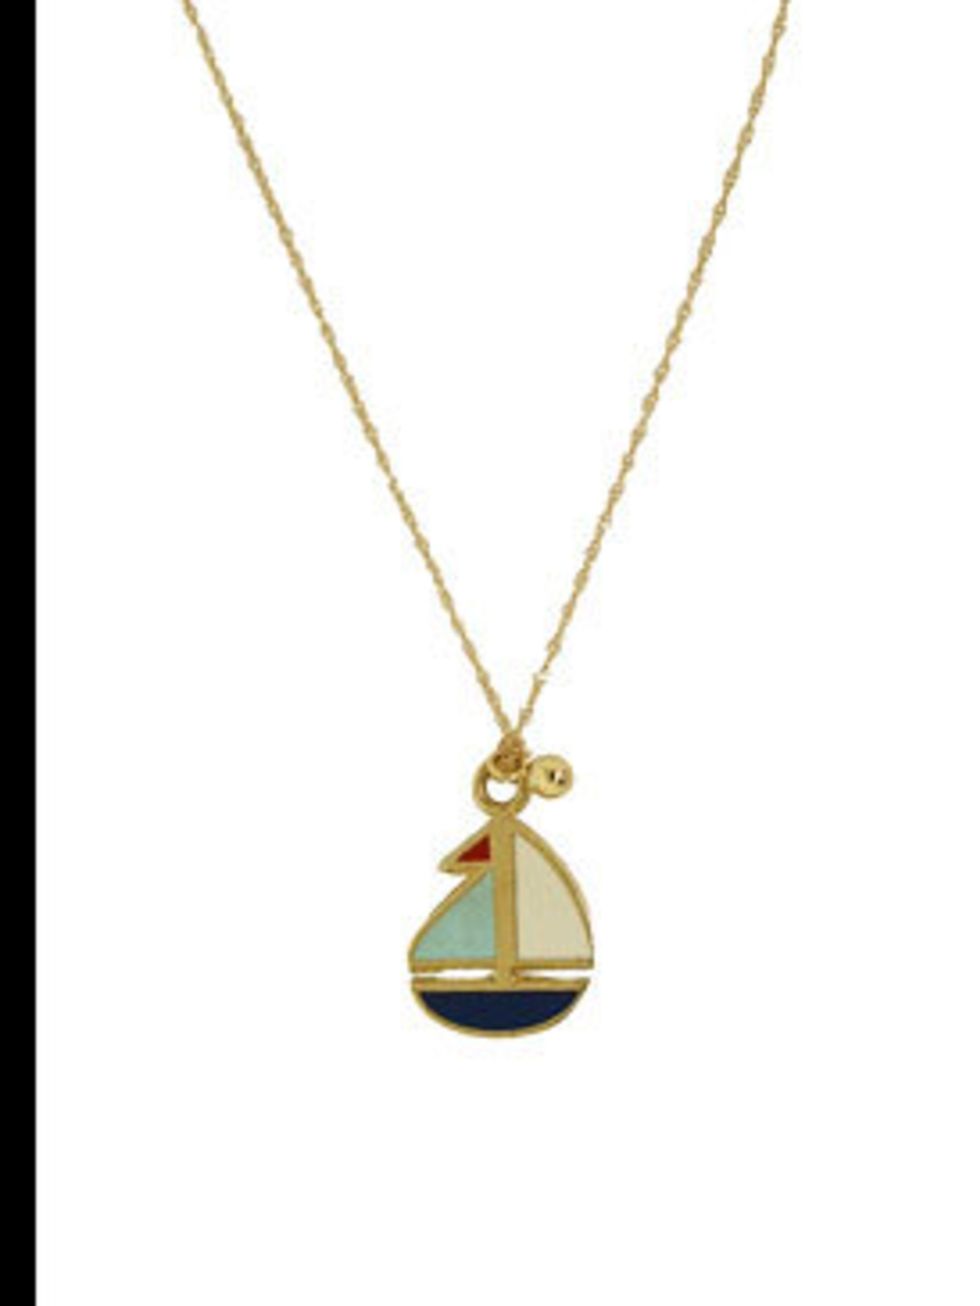 <p>Boat pendant necklace, £180, by Ginette NY at <a href="http://www.kabiri.co.uk/jewellery/necklaces/boat_pendant">Kabiri</a></p>